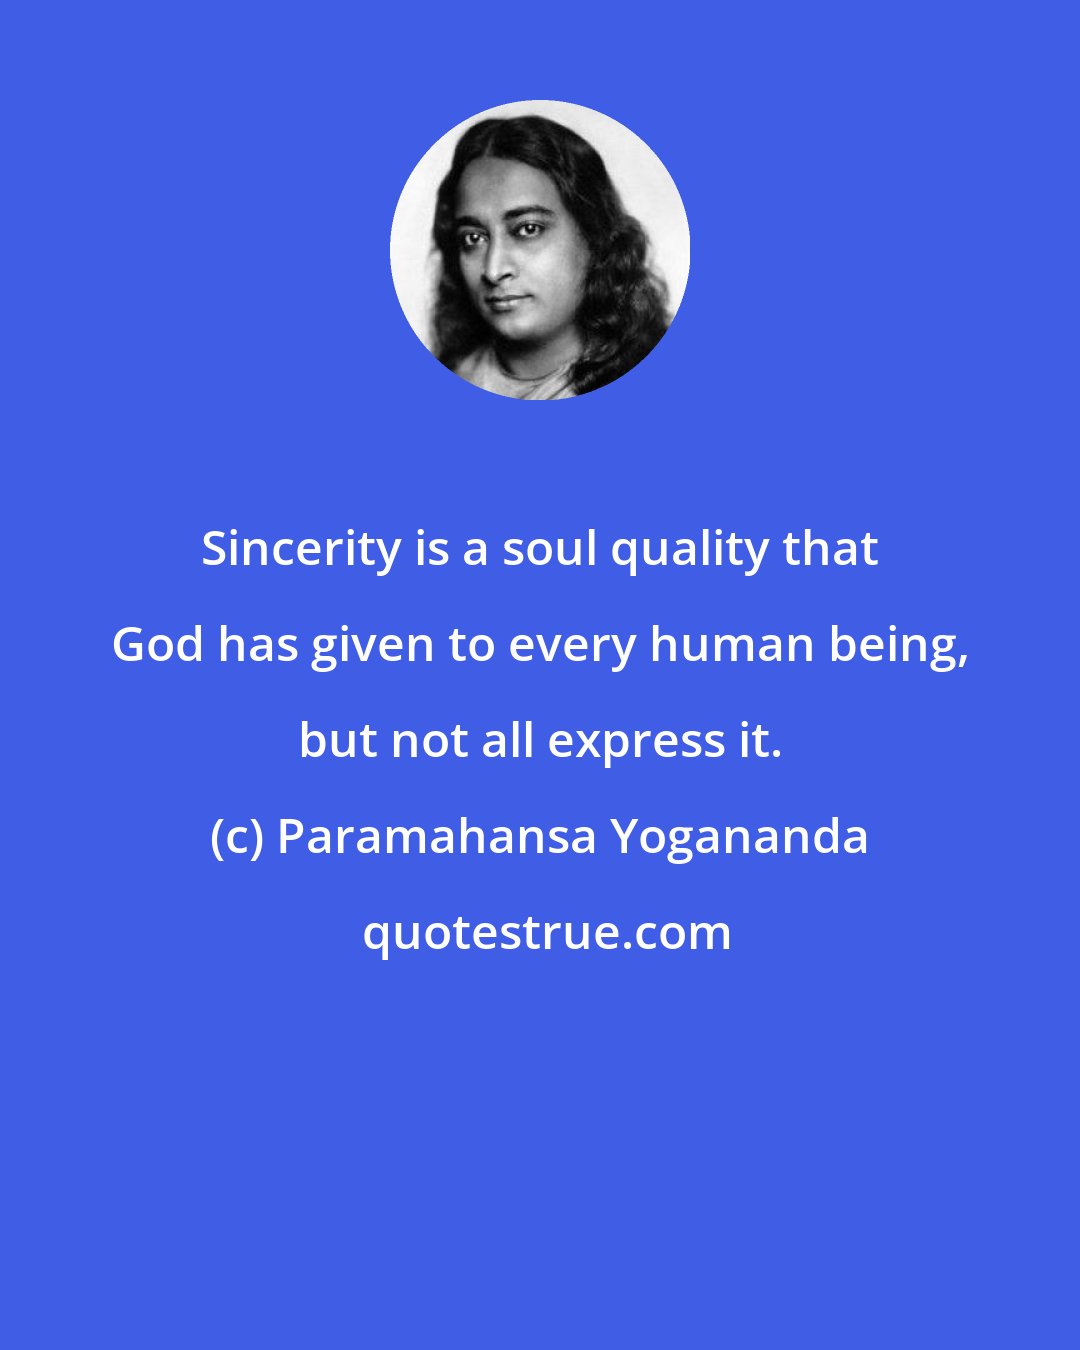 Paramahansa Yogananda: Sincerity is a soul quality that God has given to every human being, but not all express it.